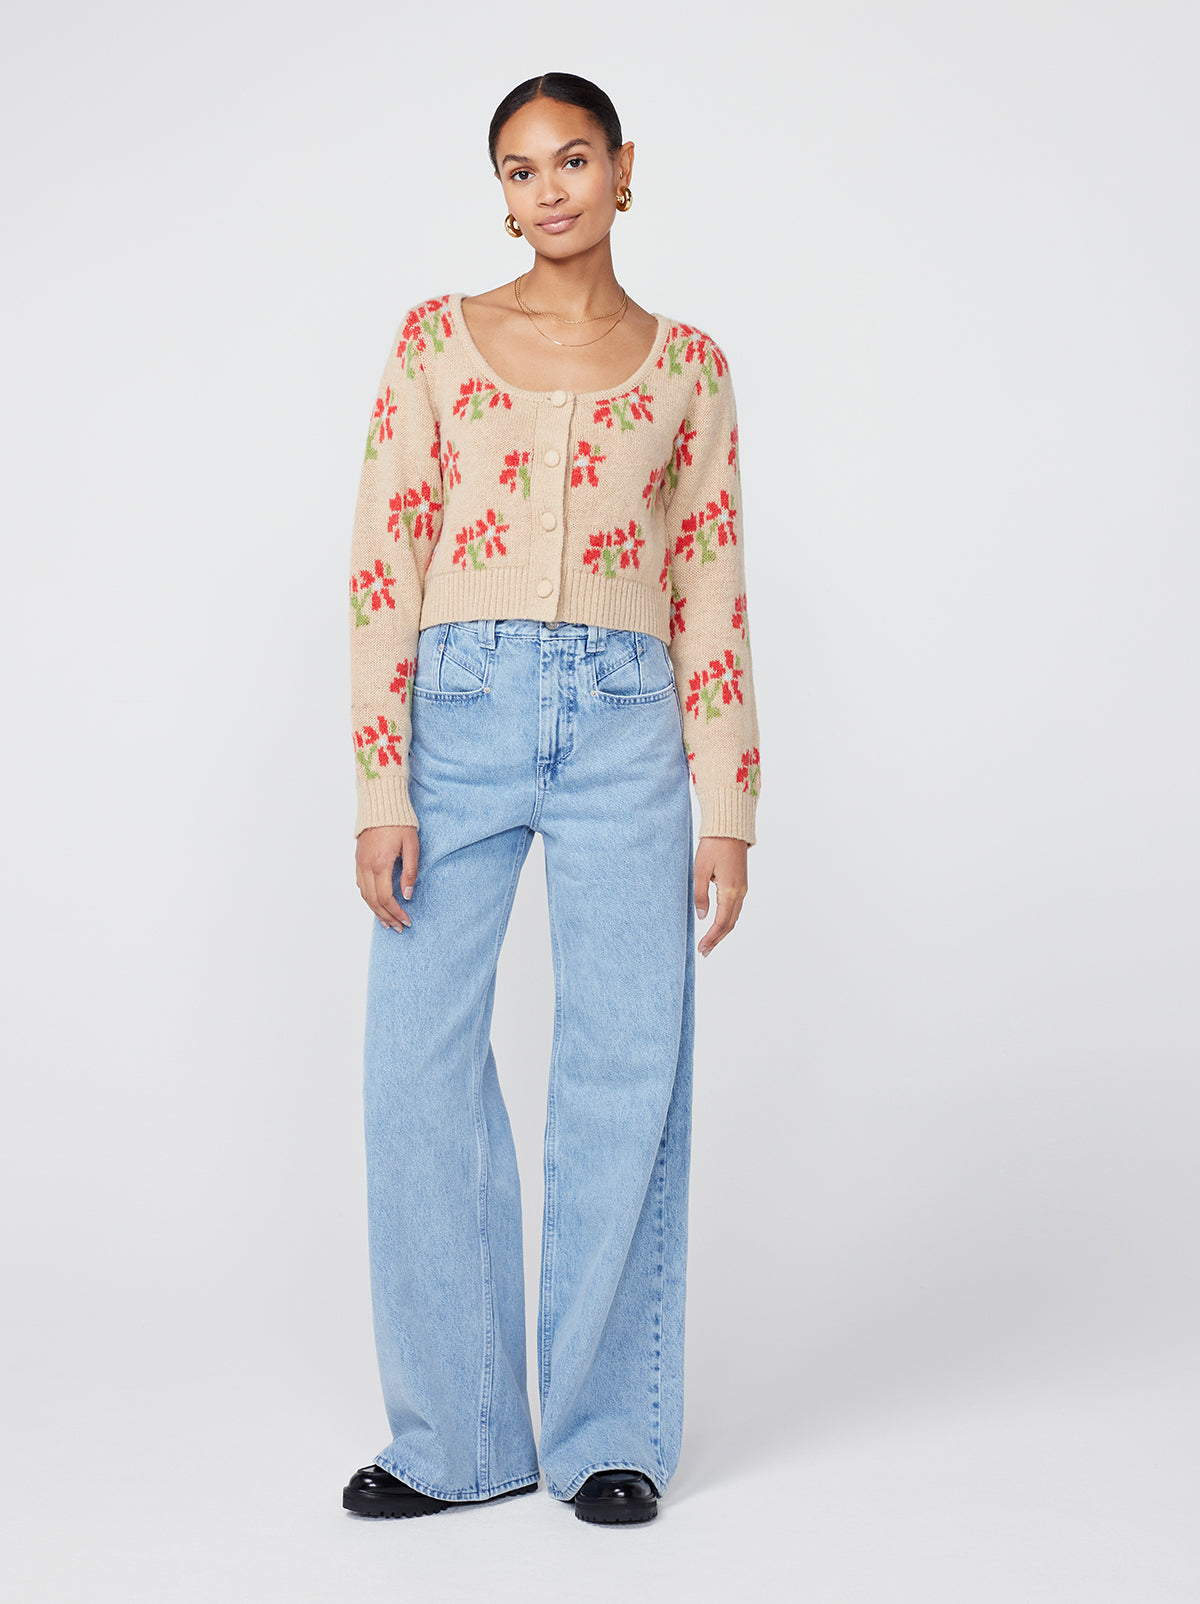 Lila Camel Floral Cropped Knit Cardigan